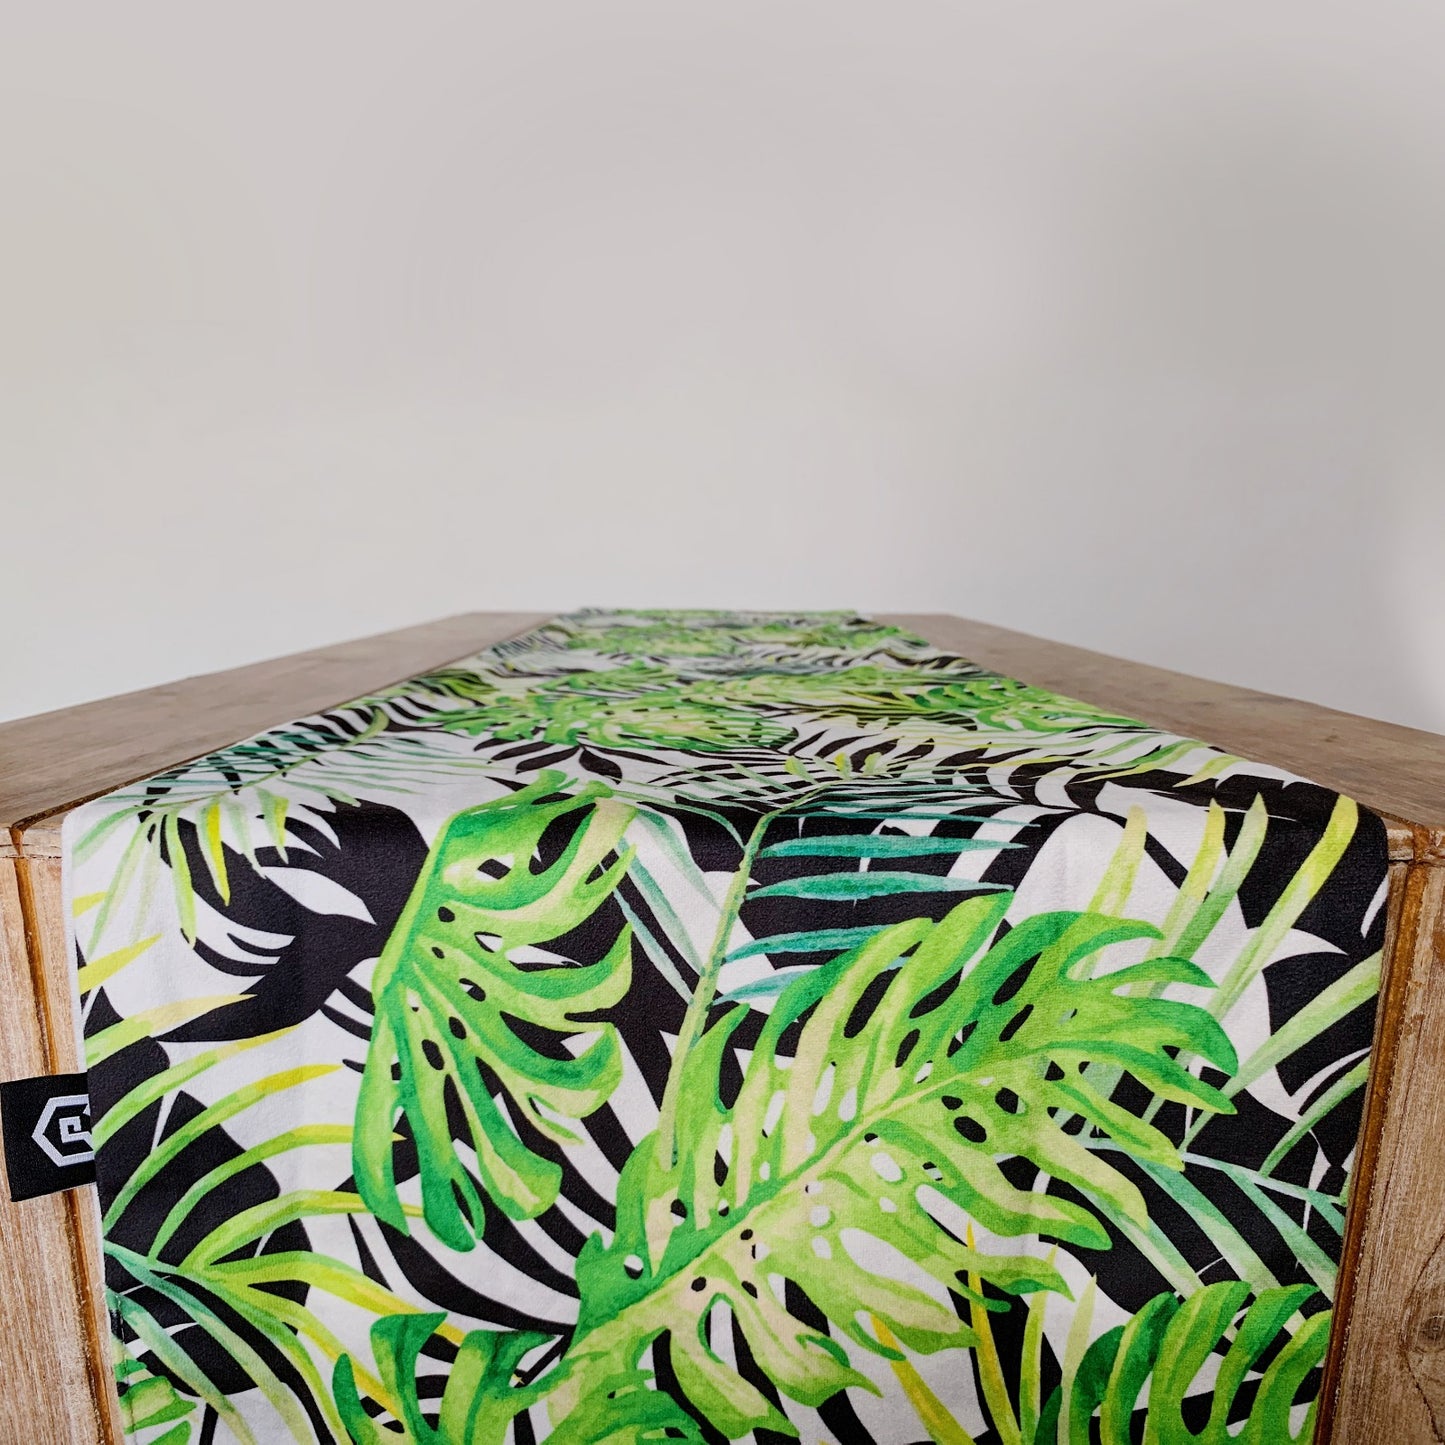 Tropical Patterned Table Runner